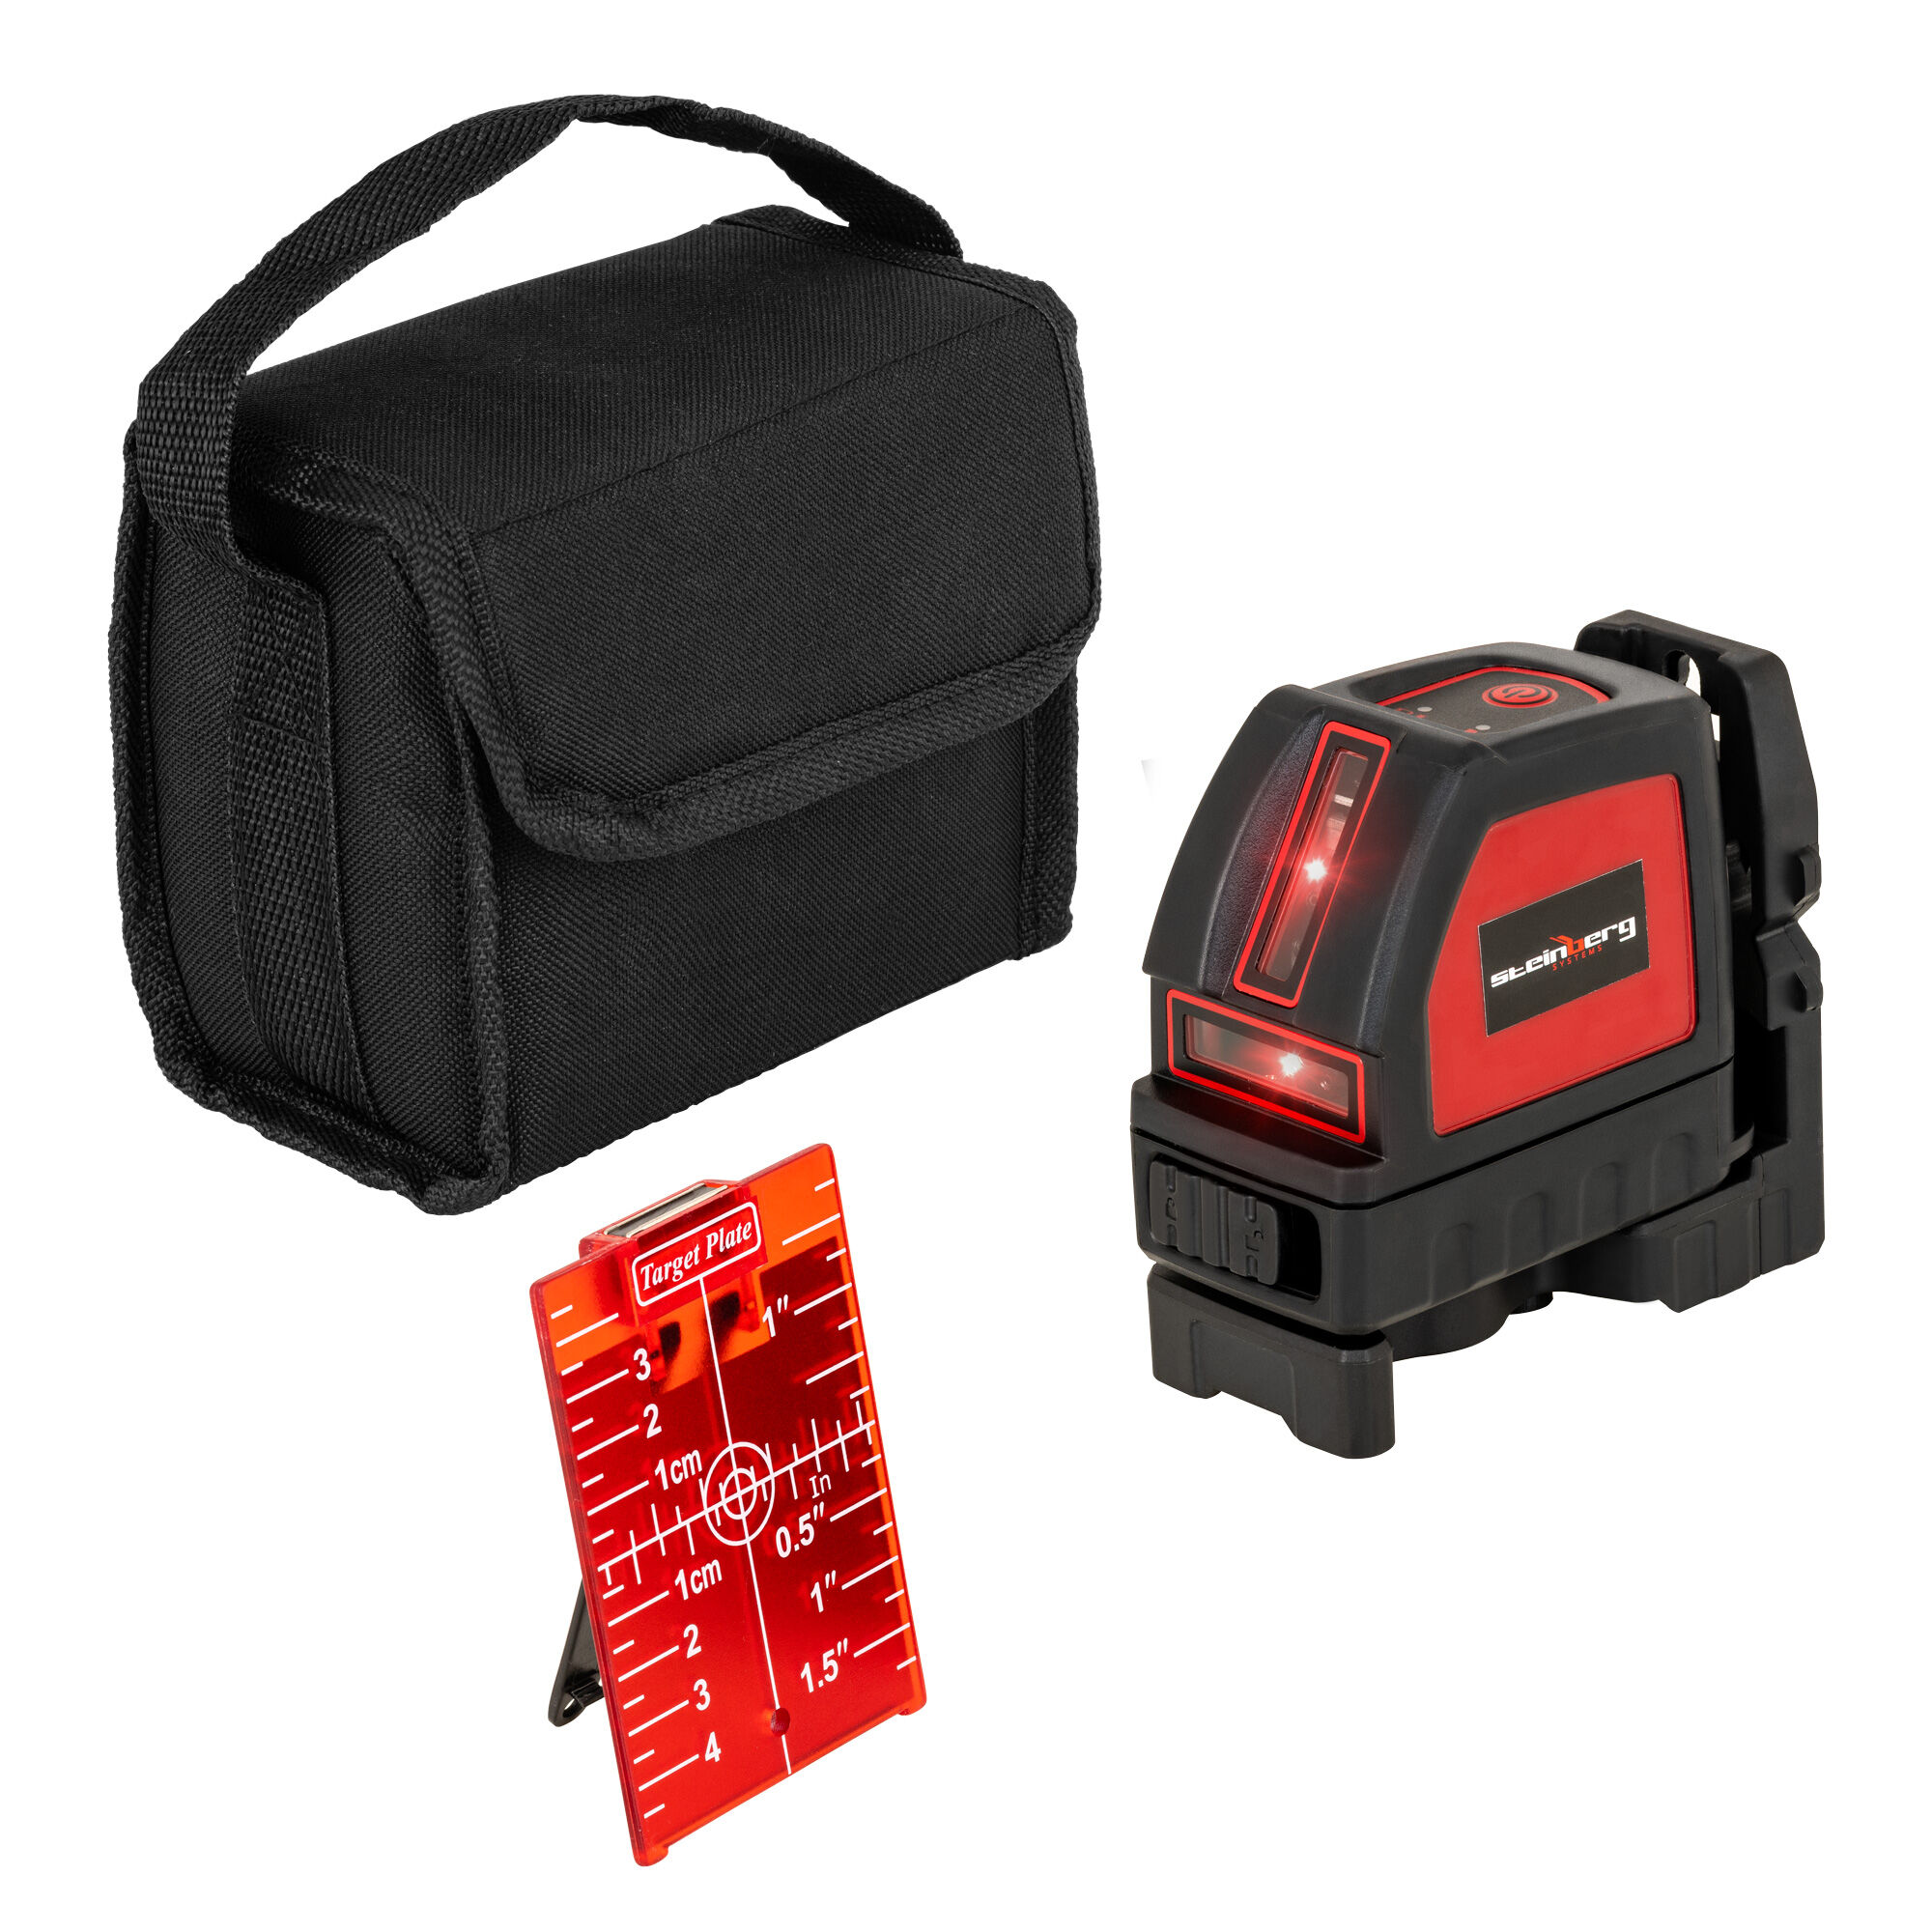 Steinberg Rotary Laser Level with Magnetic Holder and Bag - 40 m